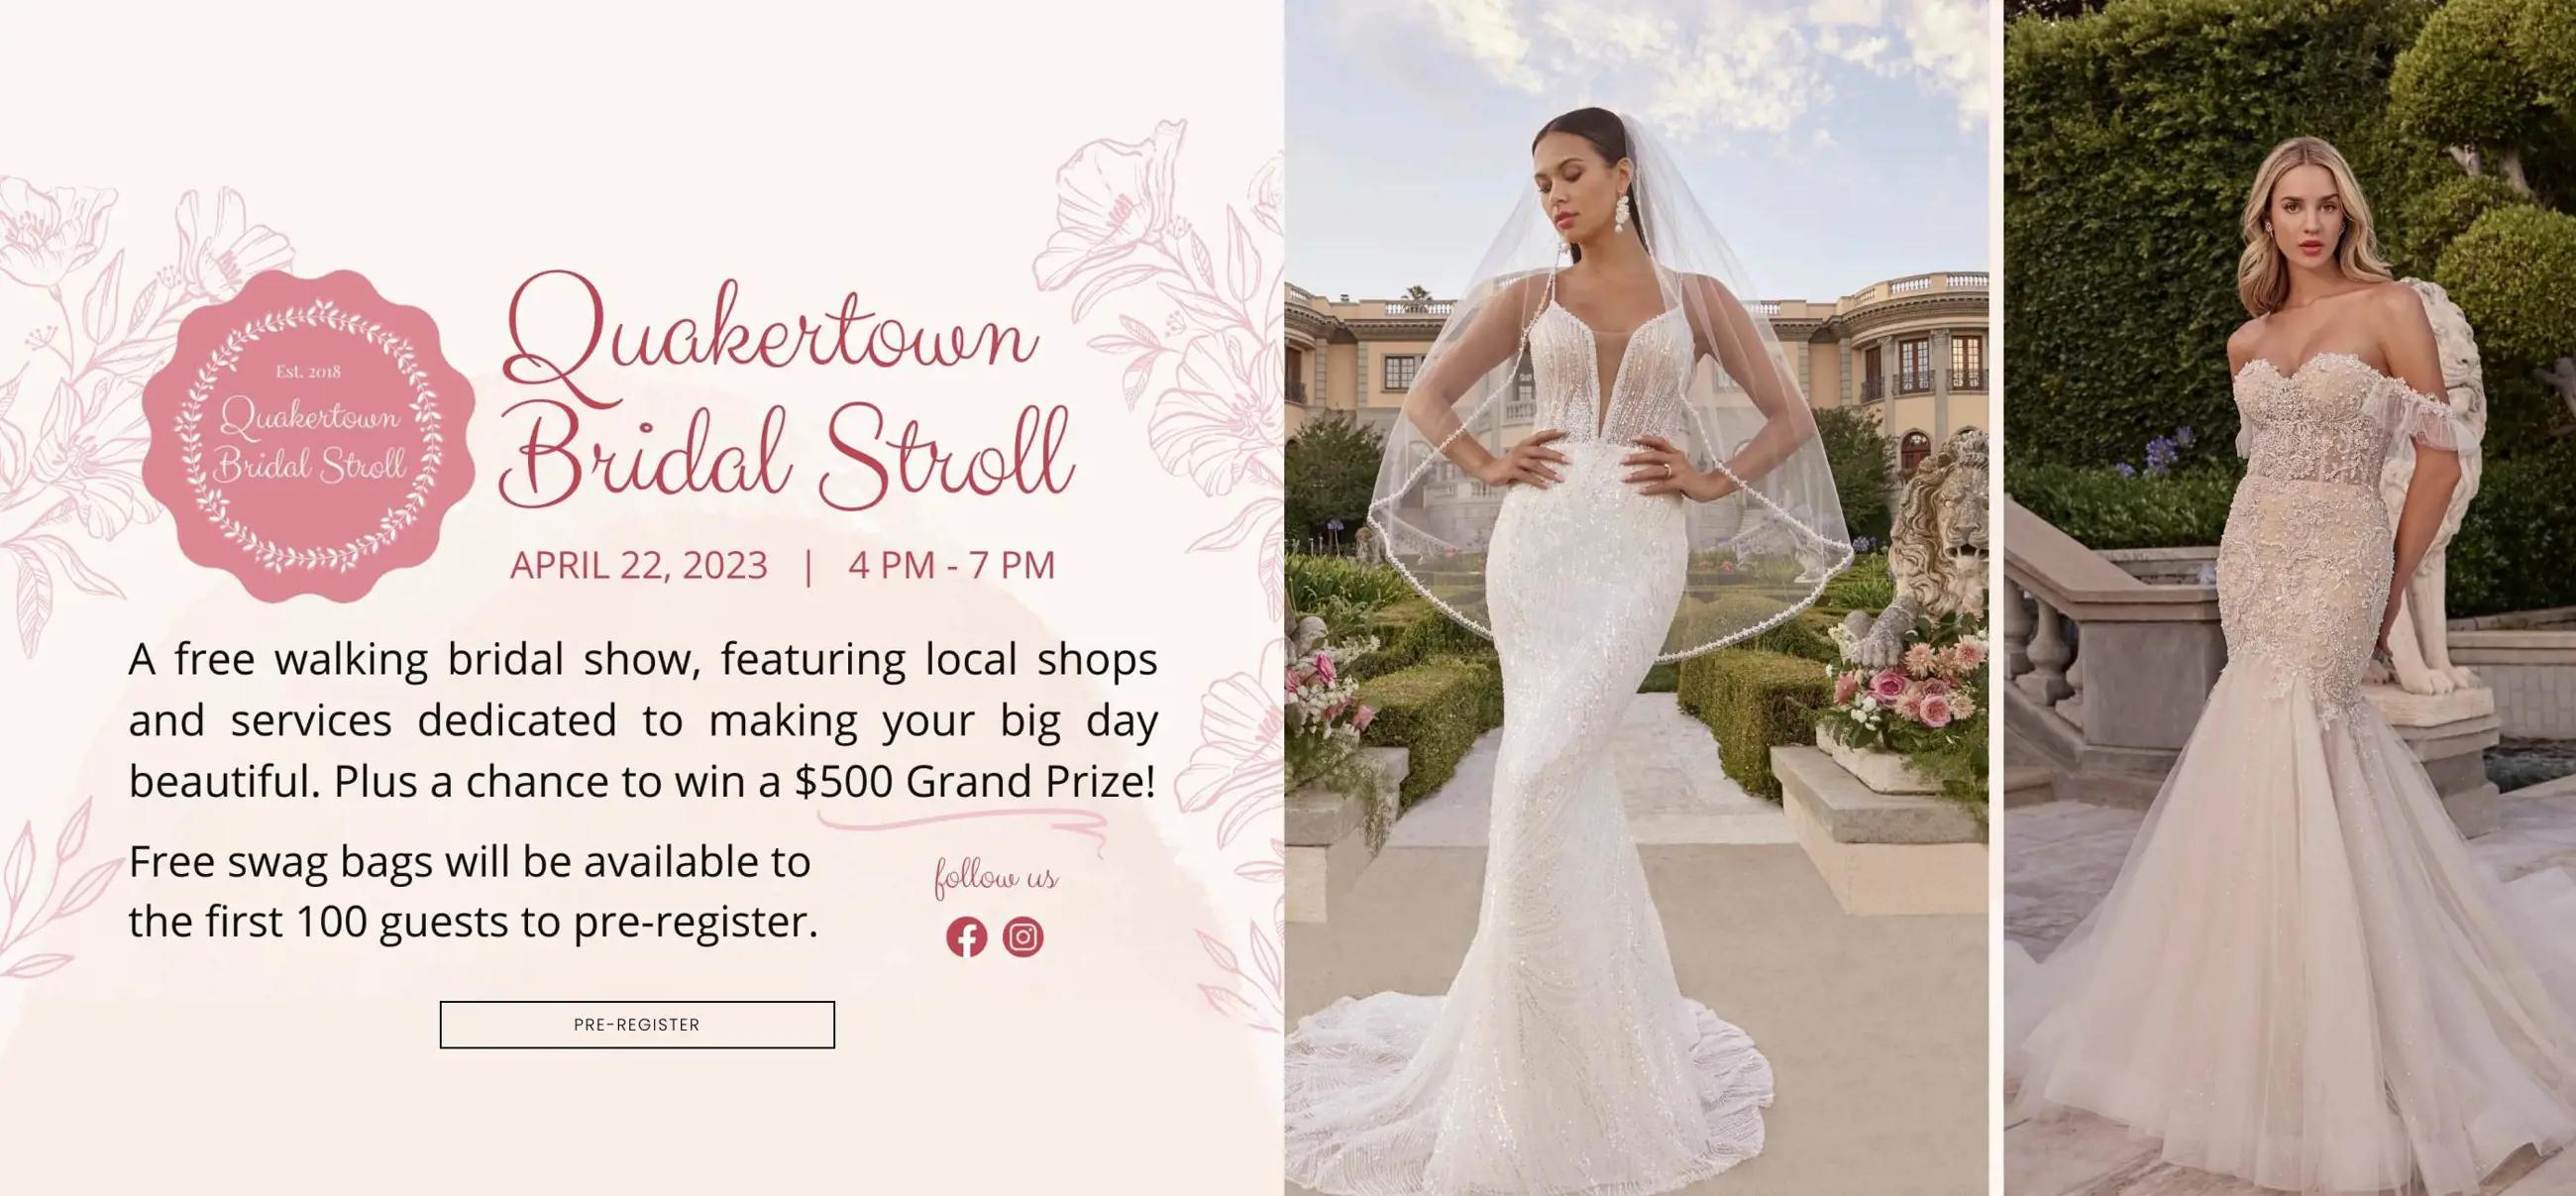 Quakertown Bridal Stroll APRIL 22, 2023 | 4 PM - 7 PM. A free walking bridal show, featuring local shops and services dedicated to making your big day beautiful.